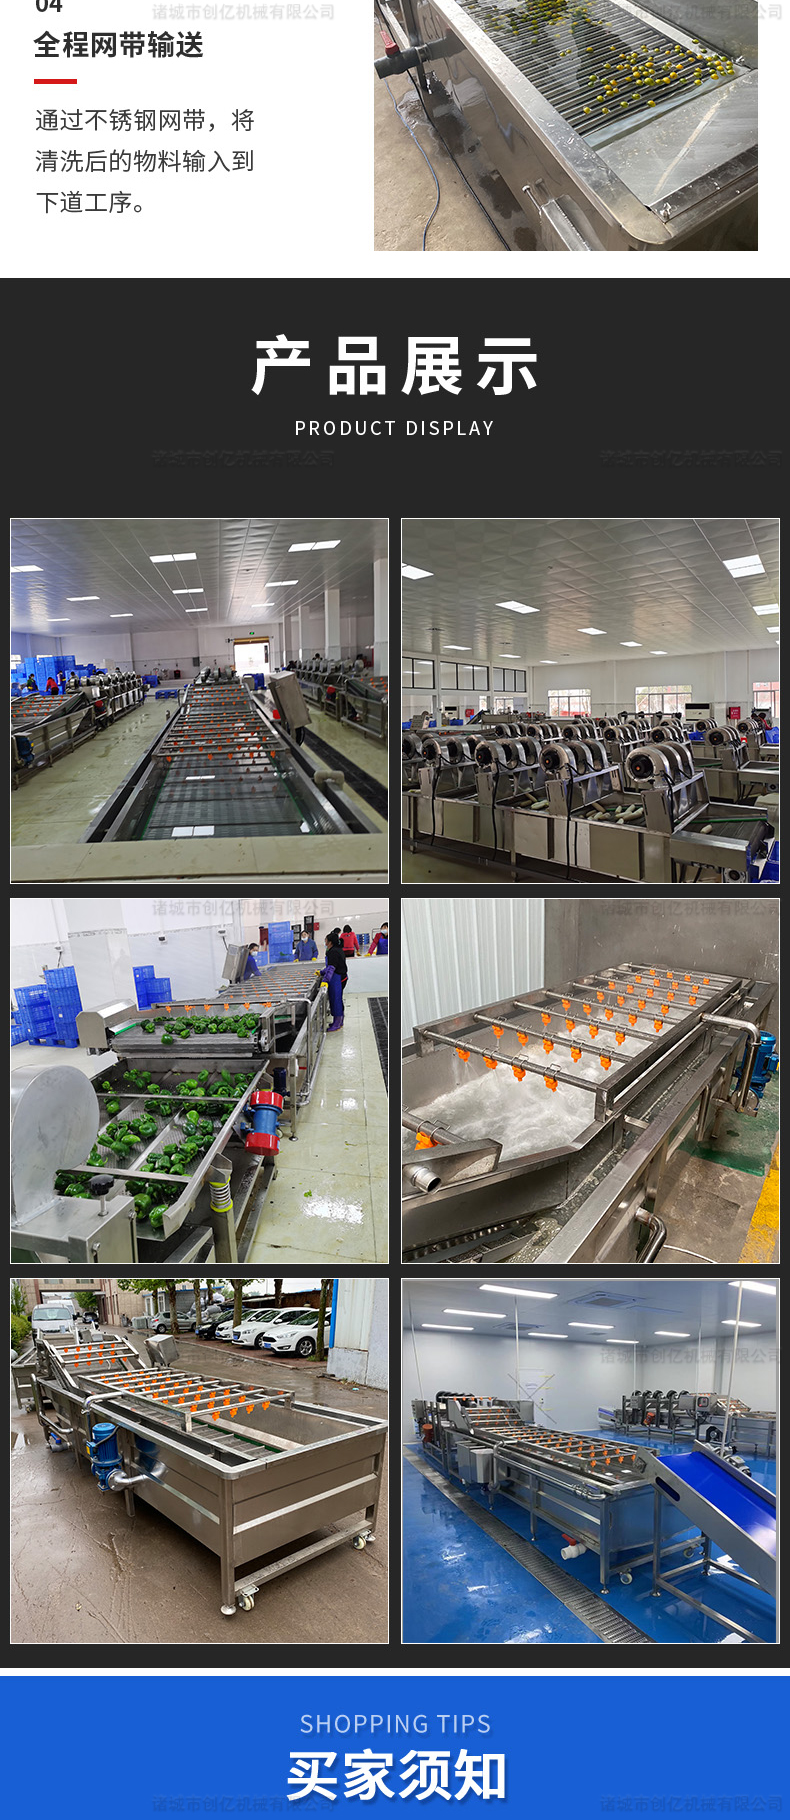 Stainless steel fruit and vegetable cleaning machine, corn deep processing equipment, vegetable processing equipment, creating billions